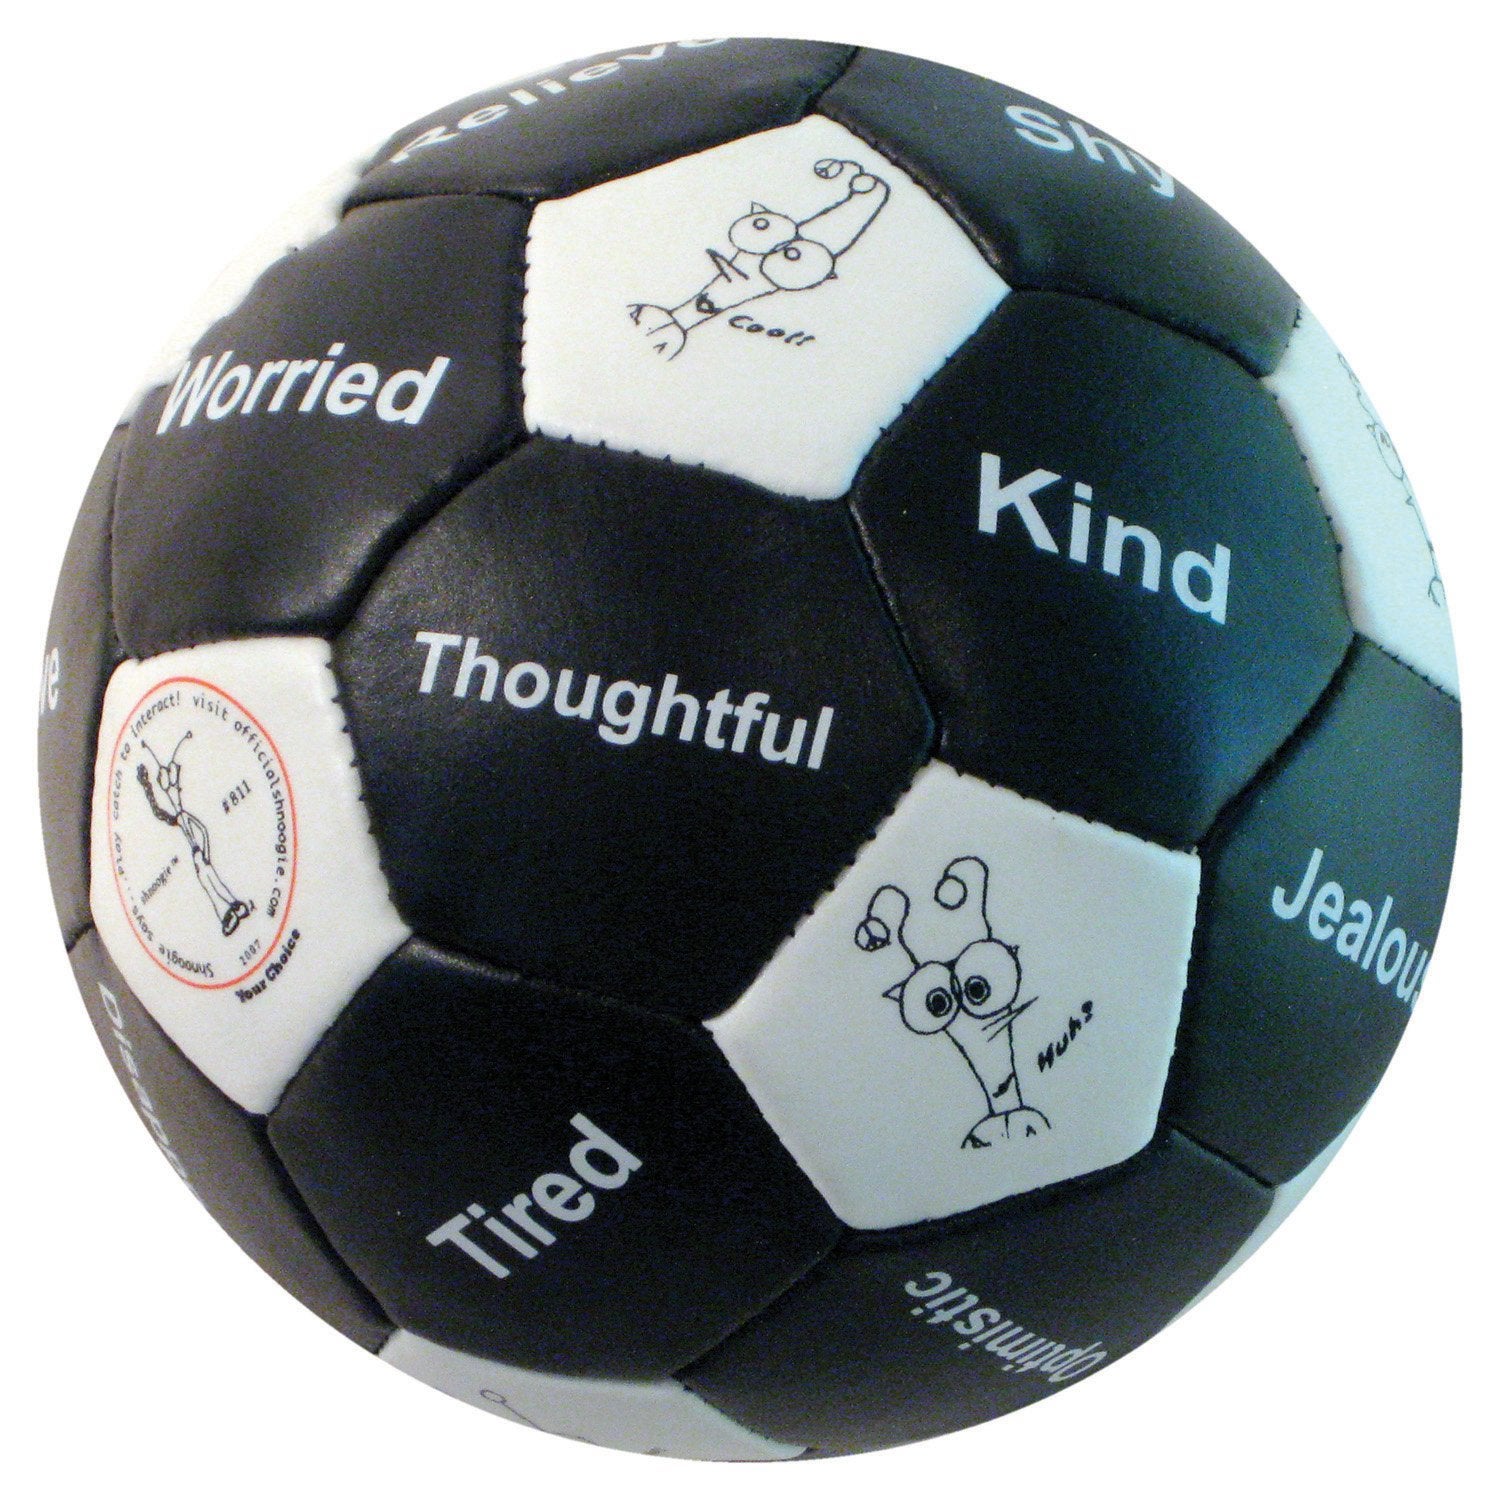 the ball with words and expressions all over like kind thoughtful kind jealous and more